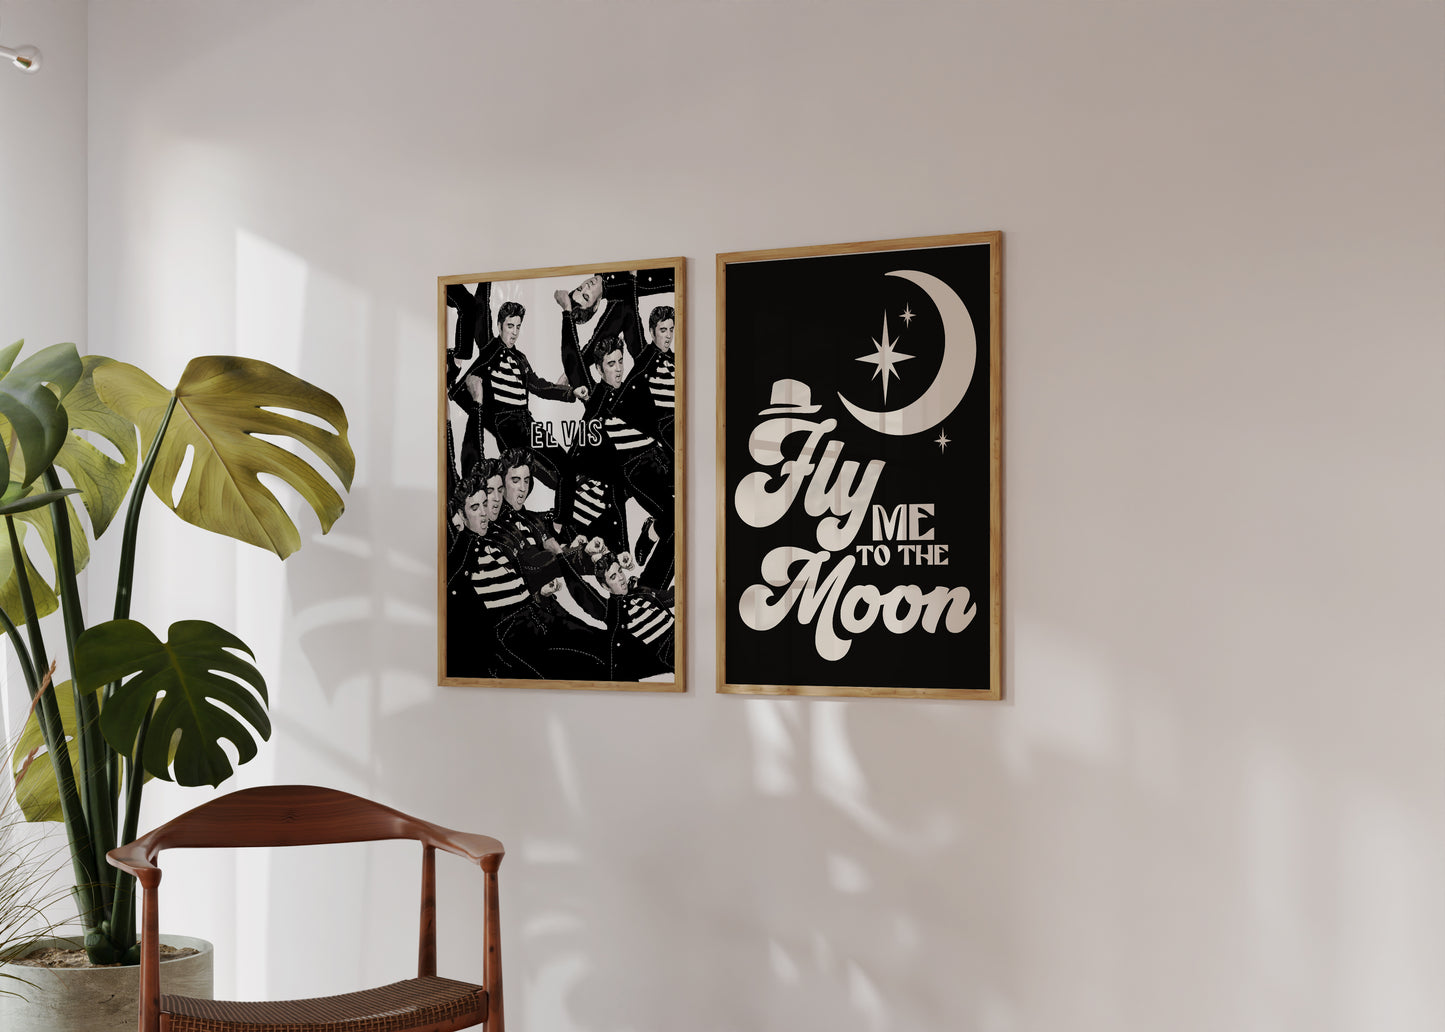 Fly me to the Moon Print